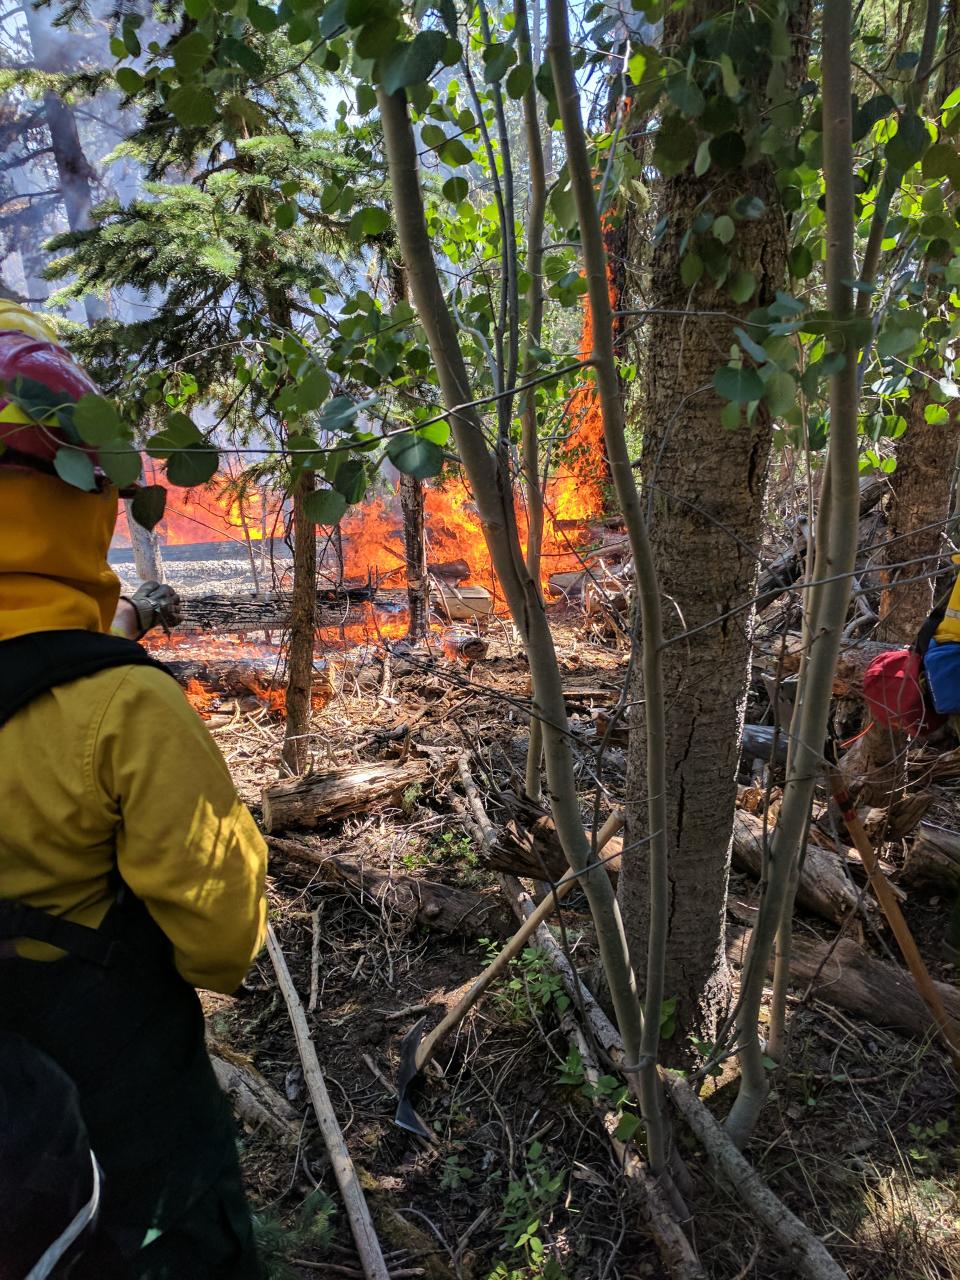 The Ohio crew combatting a fire in the Sandia Mountain Crest near Albuquerque, New Mexico.  Cambridge Fire Department Assistant Chief Justin Warner has made 14 trips since 2002 as part of Ohio teams that travel to fight incidents such as fires, floods, hurricanes or other emergency situations.